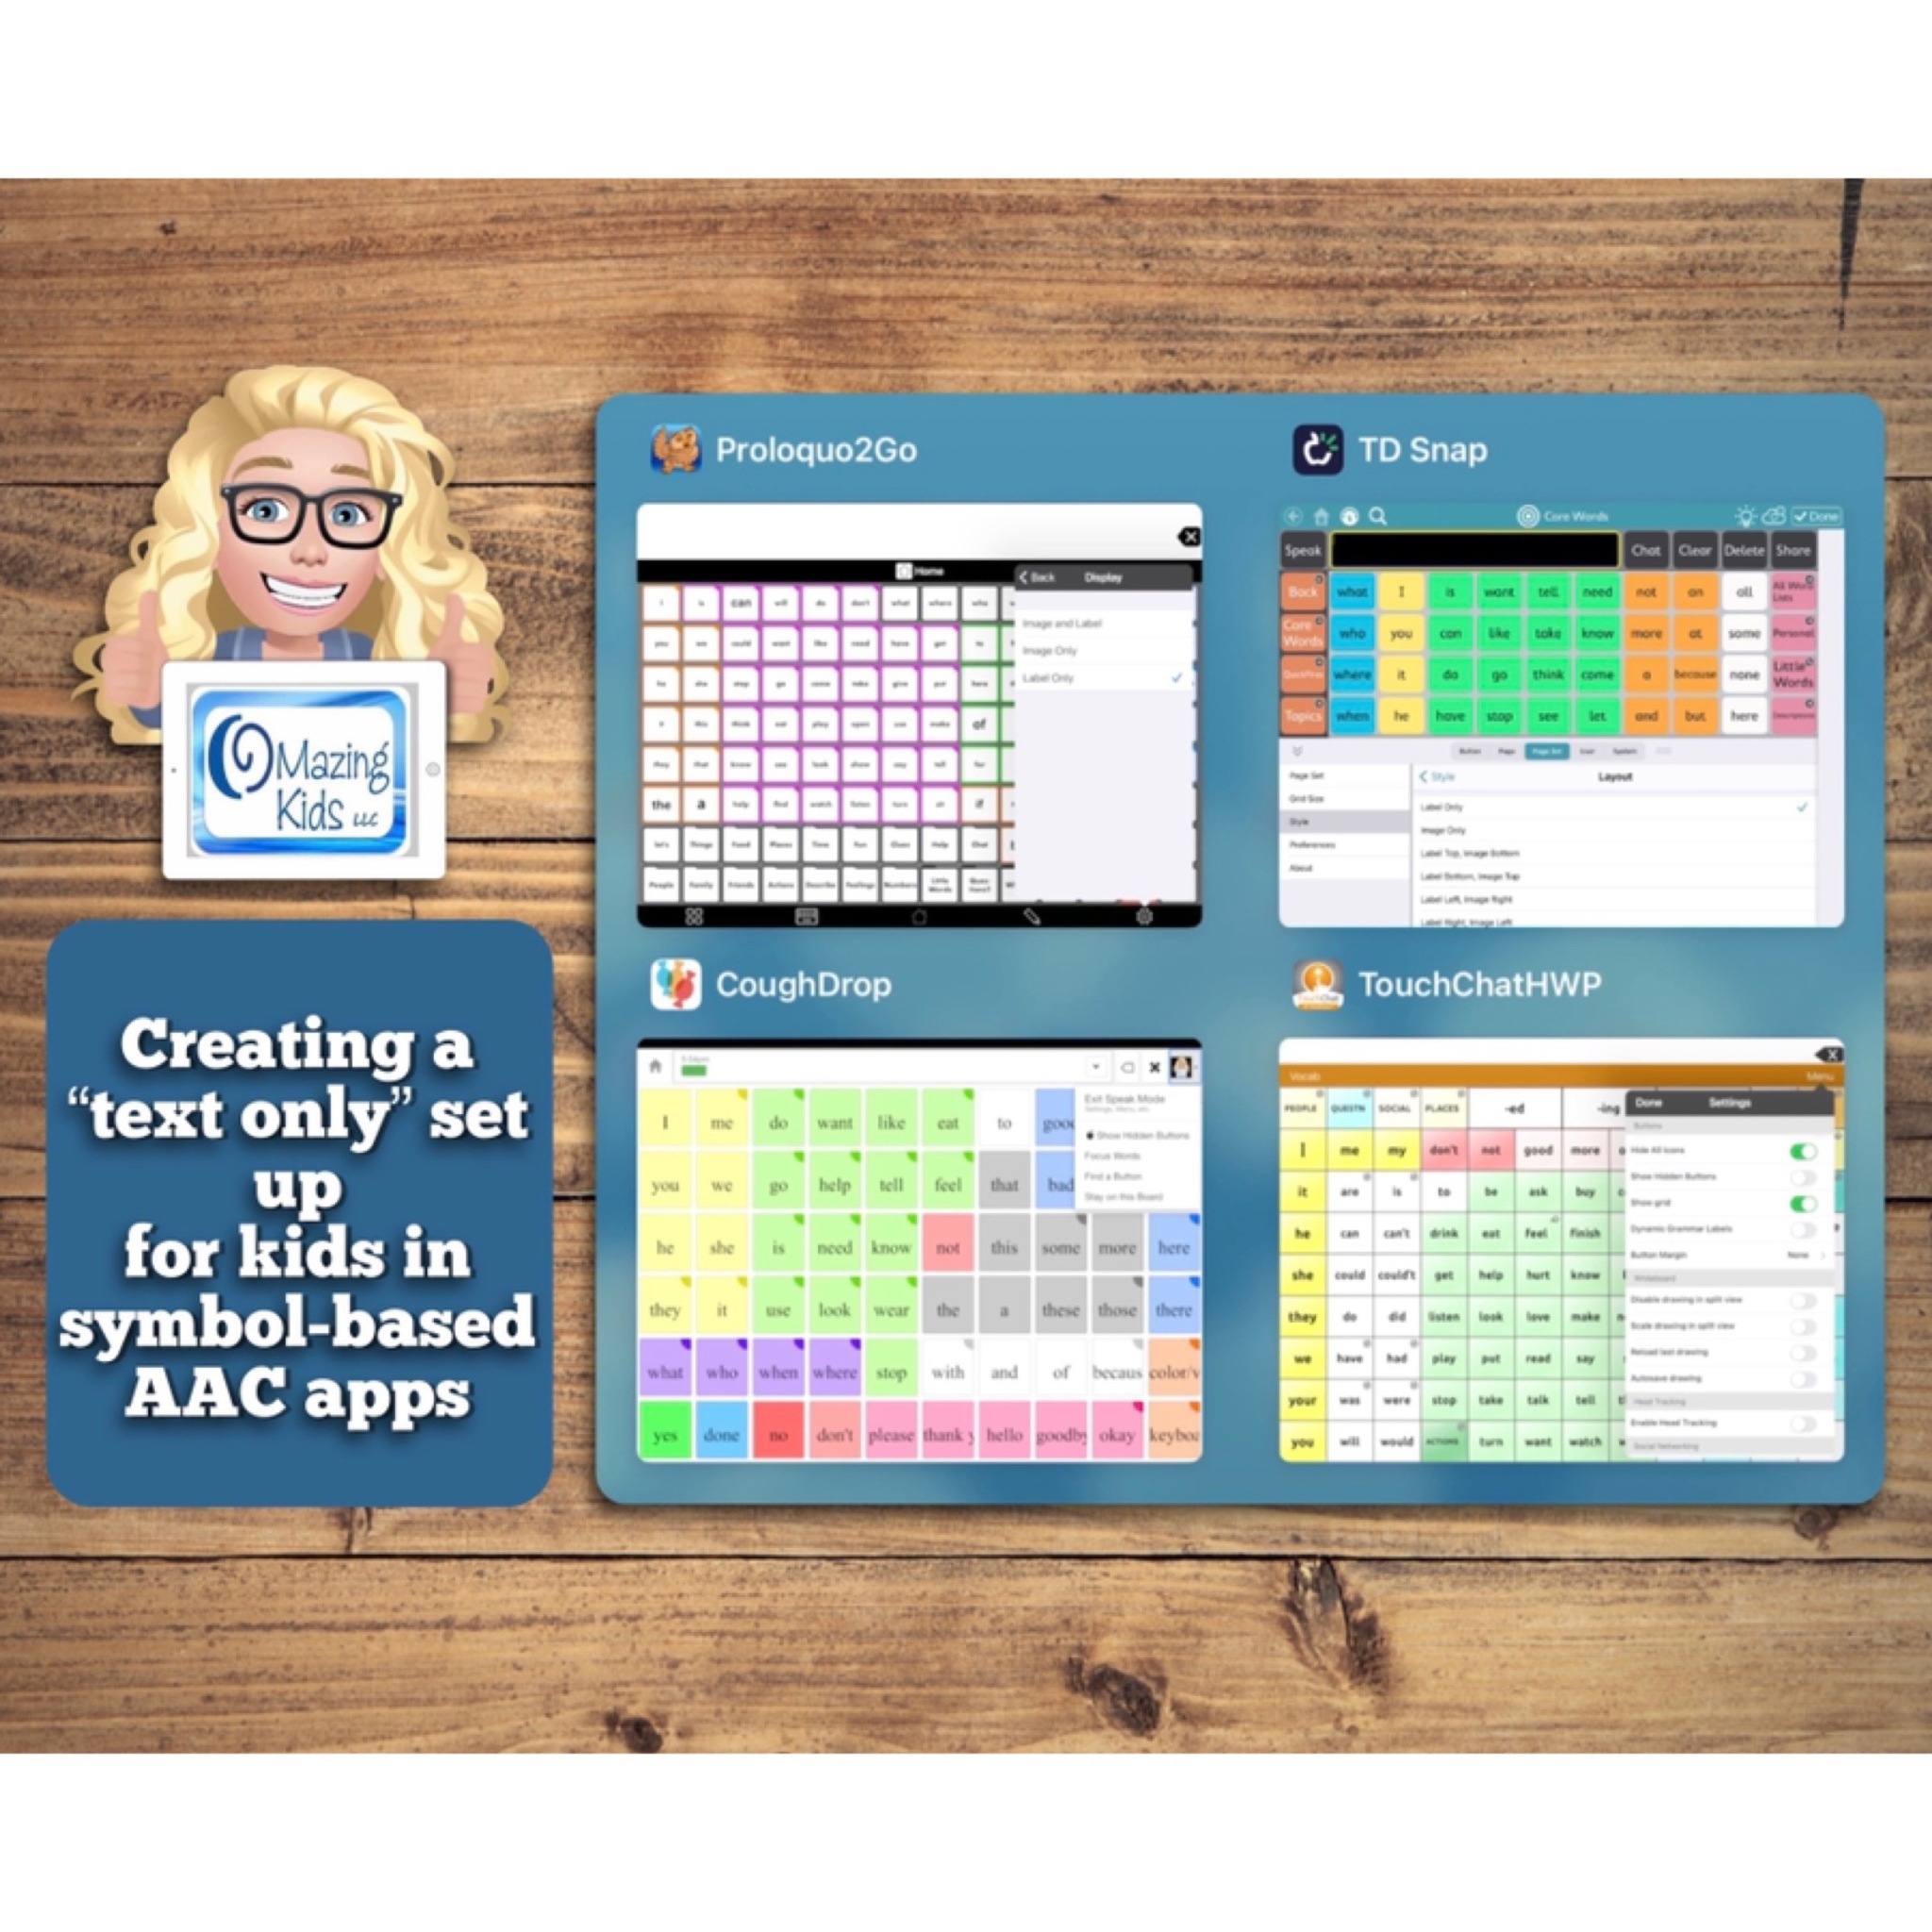 Creating a “text only” set up for kids in symbol-based AAC apps